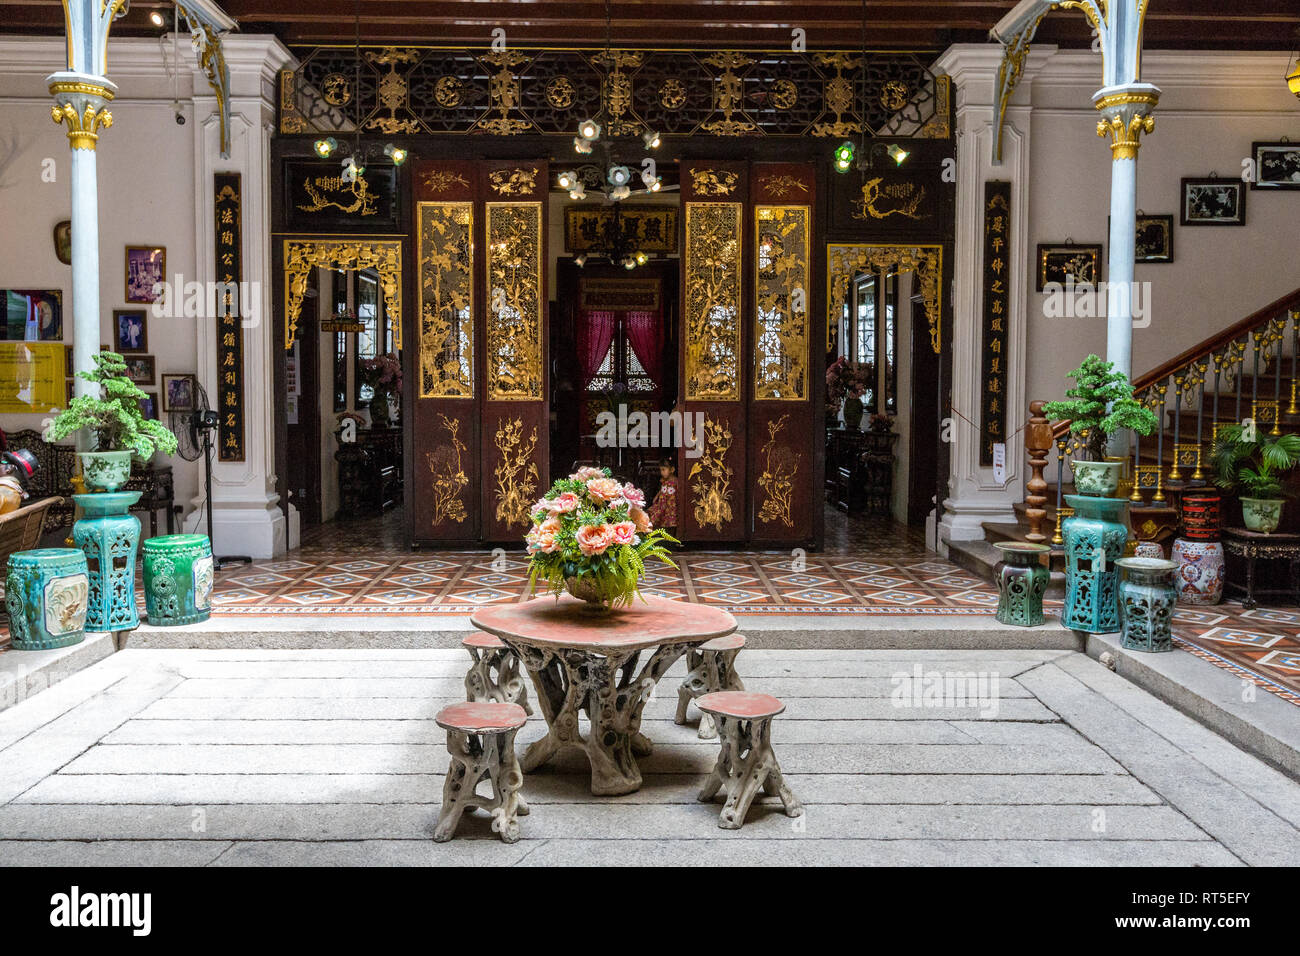 Peranakan Mansion, View from Inner Courtyard toward Front Entry Room for Welcoming Guests, George Town, Penang, Malaysia. Stock Photo